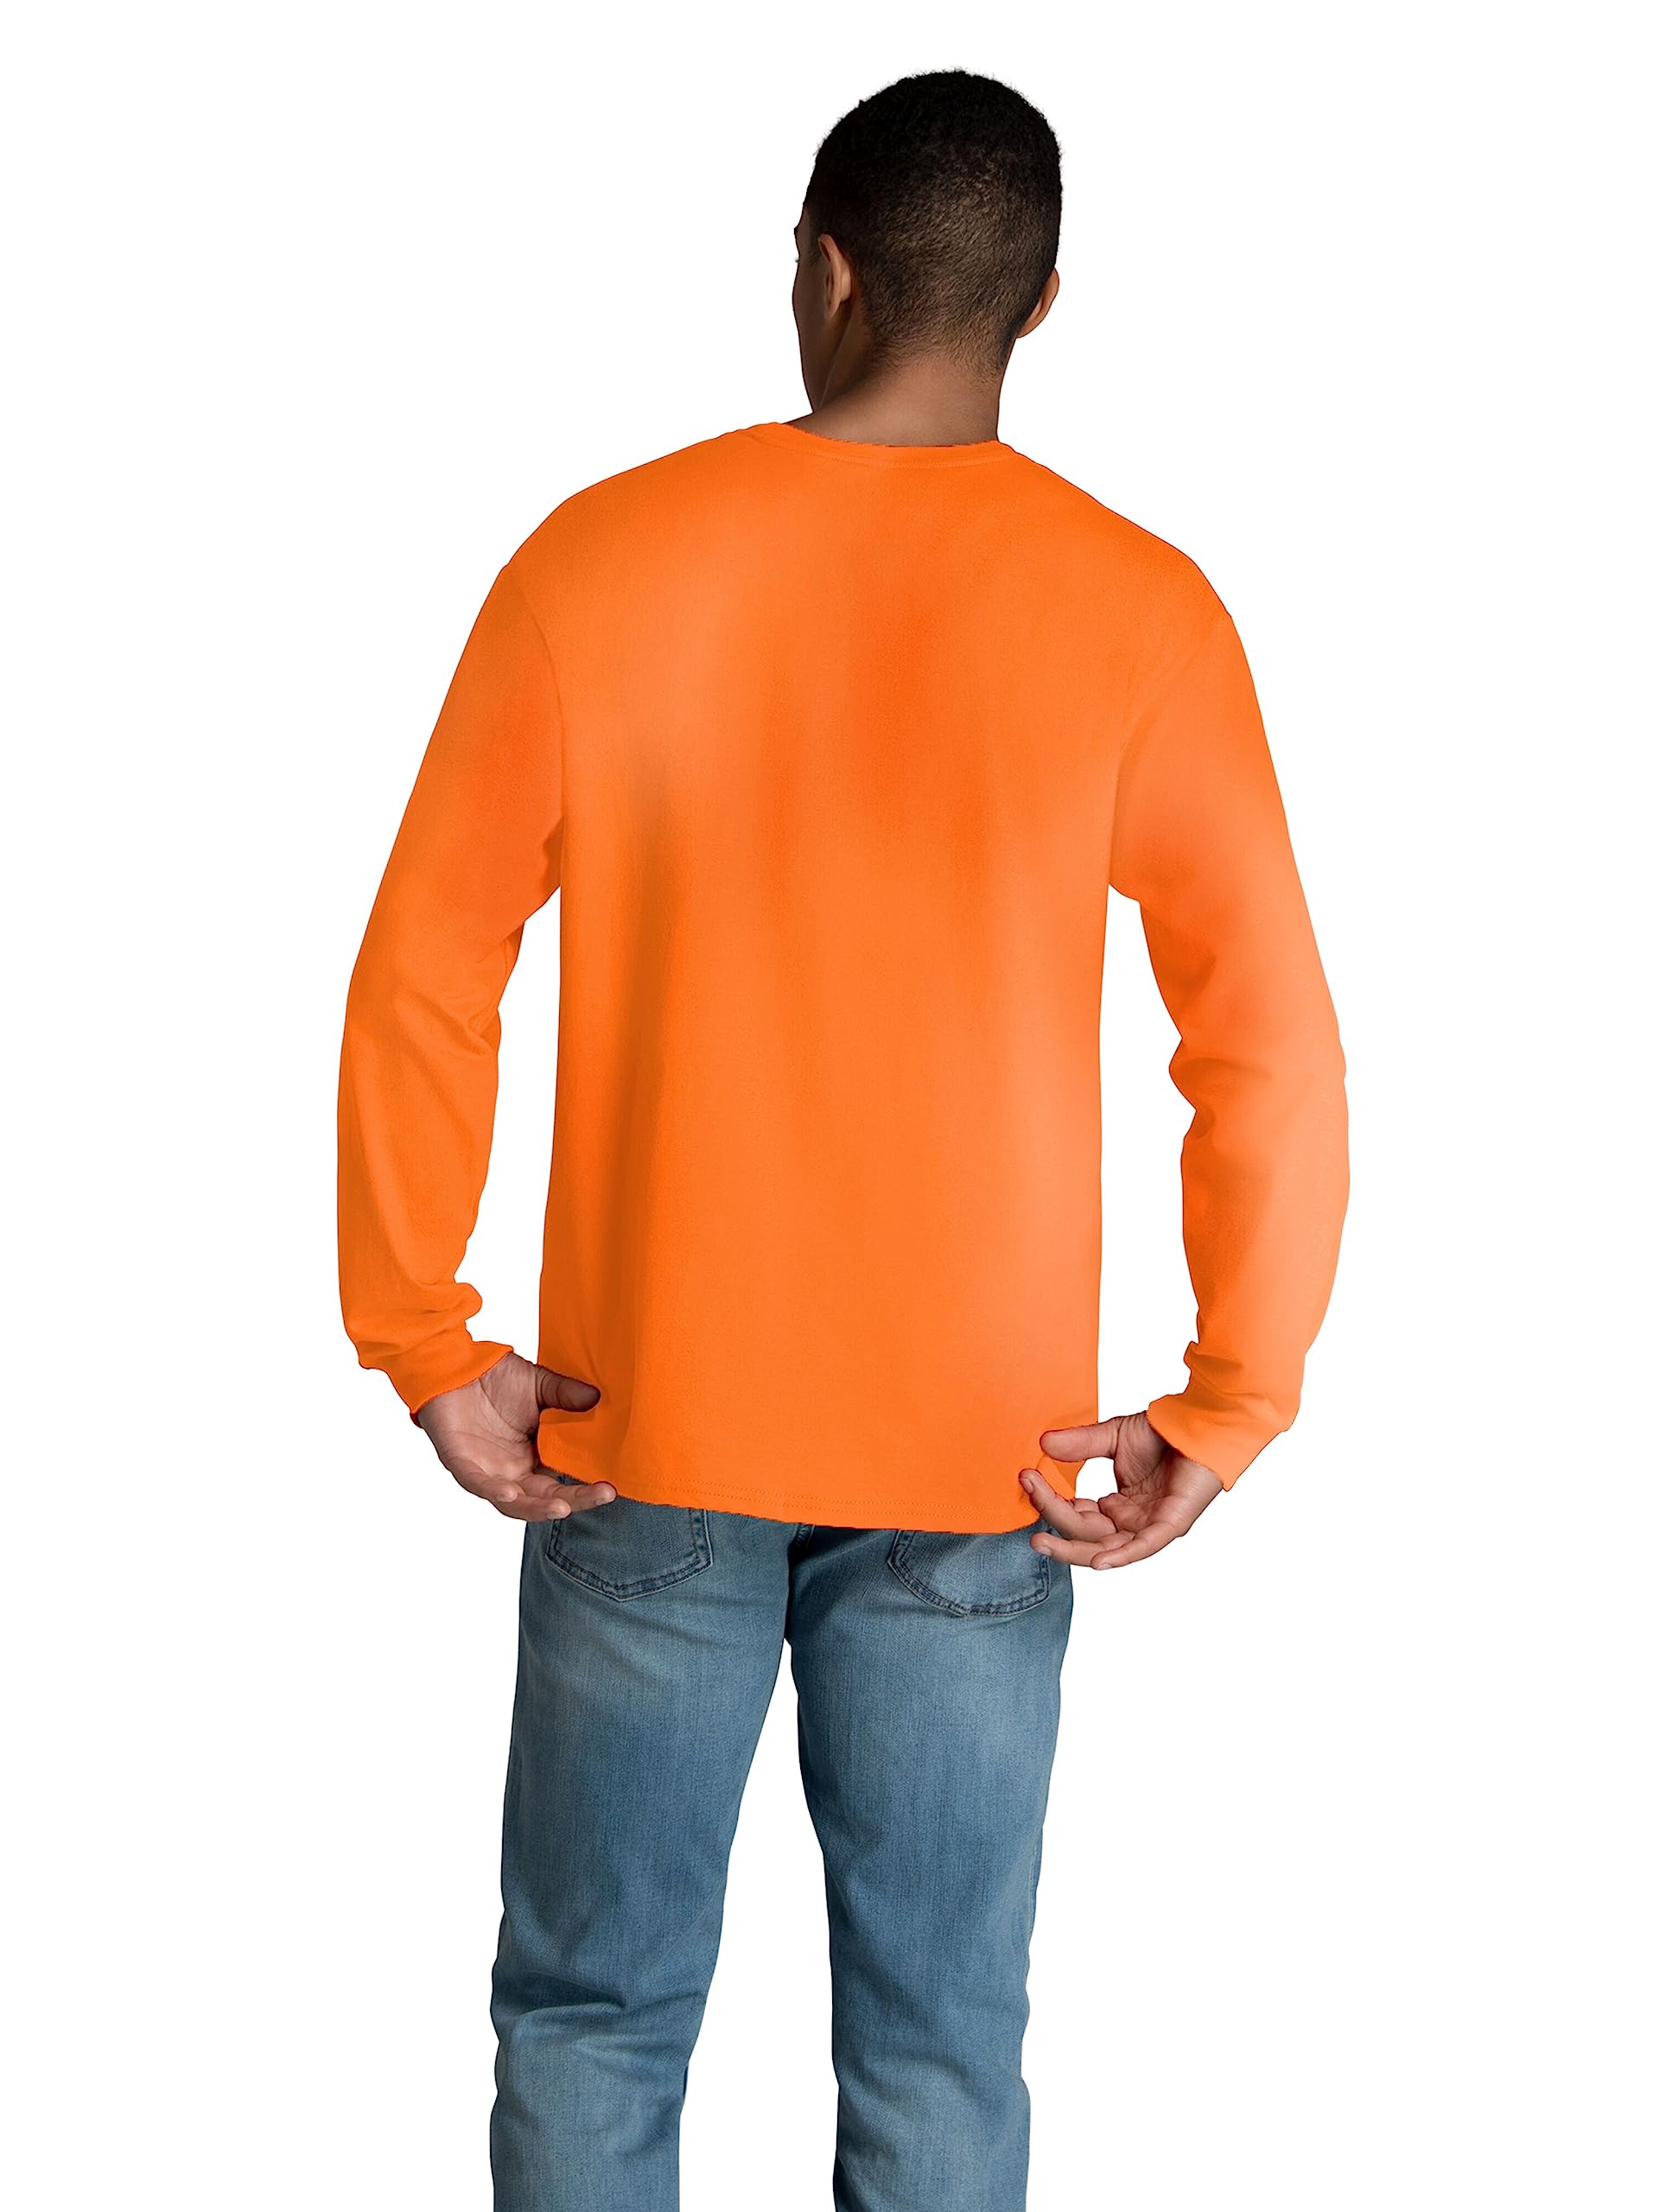 Fruit of the Loom Men's Eversoft Cotton Long Sleeve T Shirts, Breathable & Moisture Wicking with Odor Control, Sizes S-4x